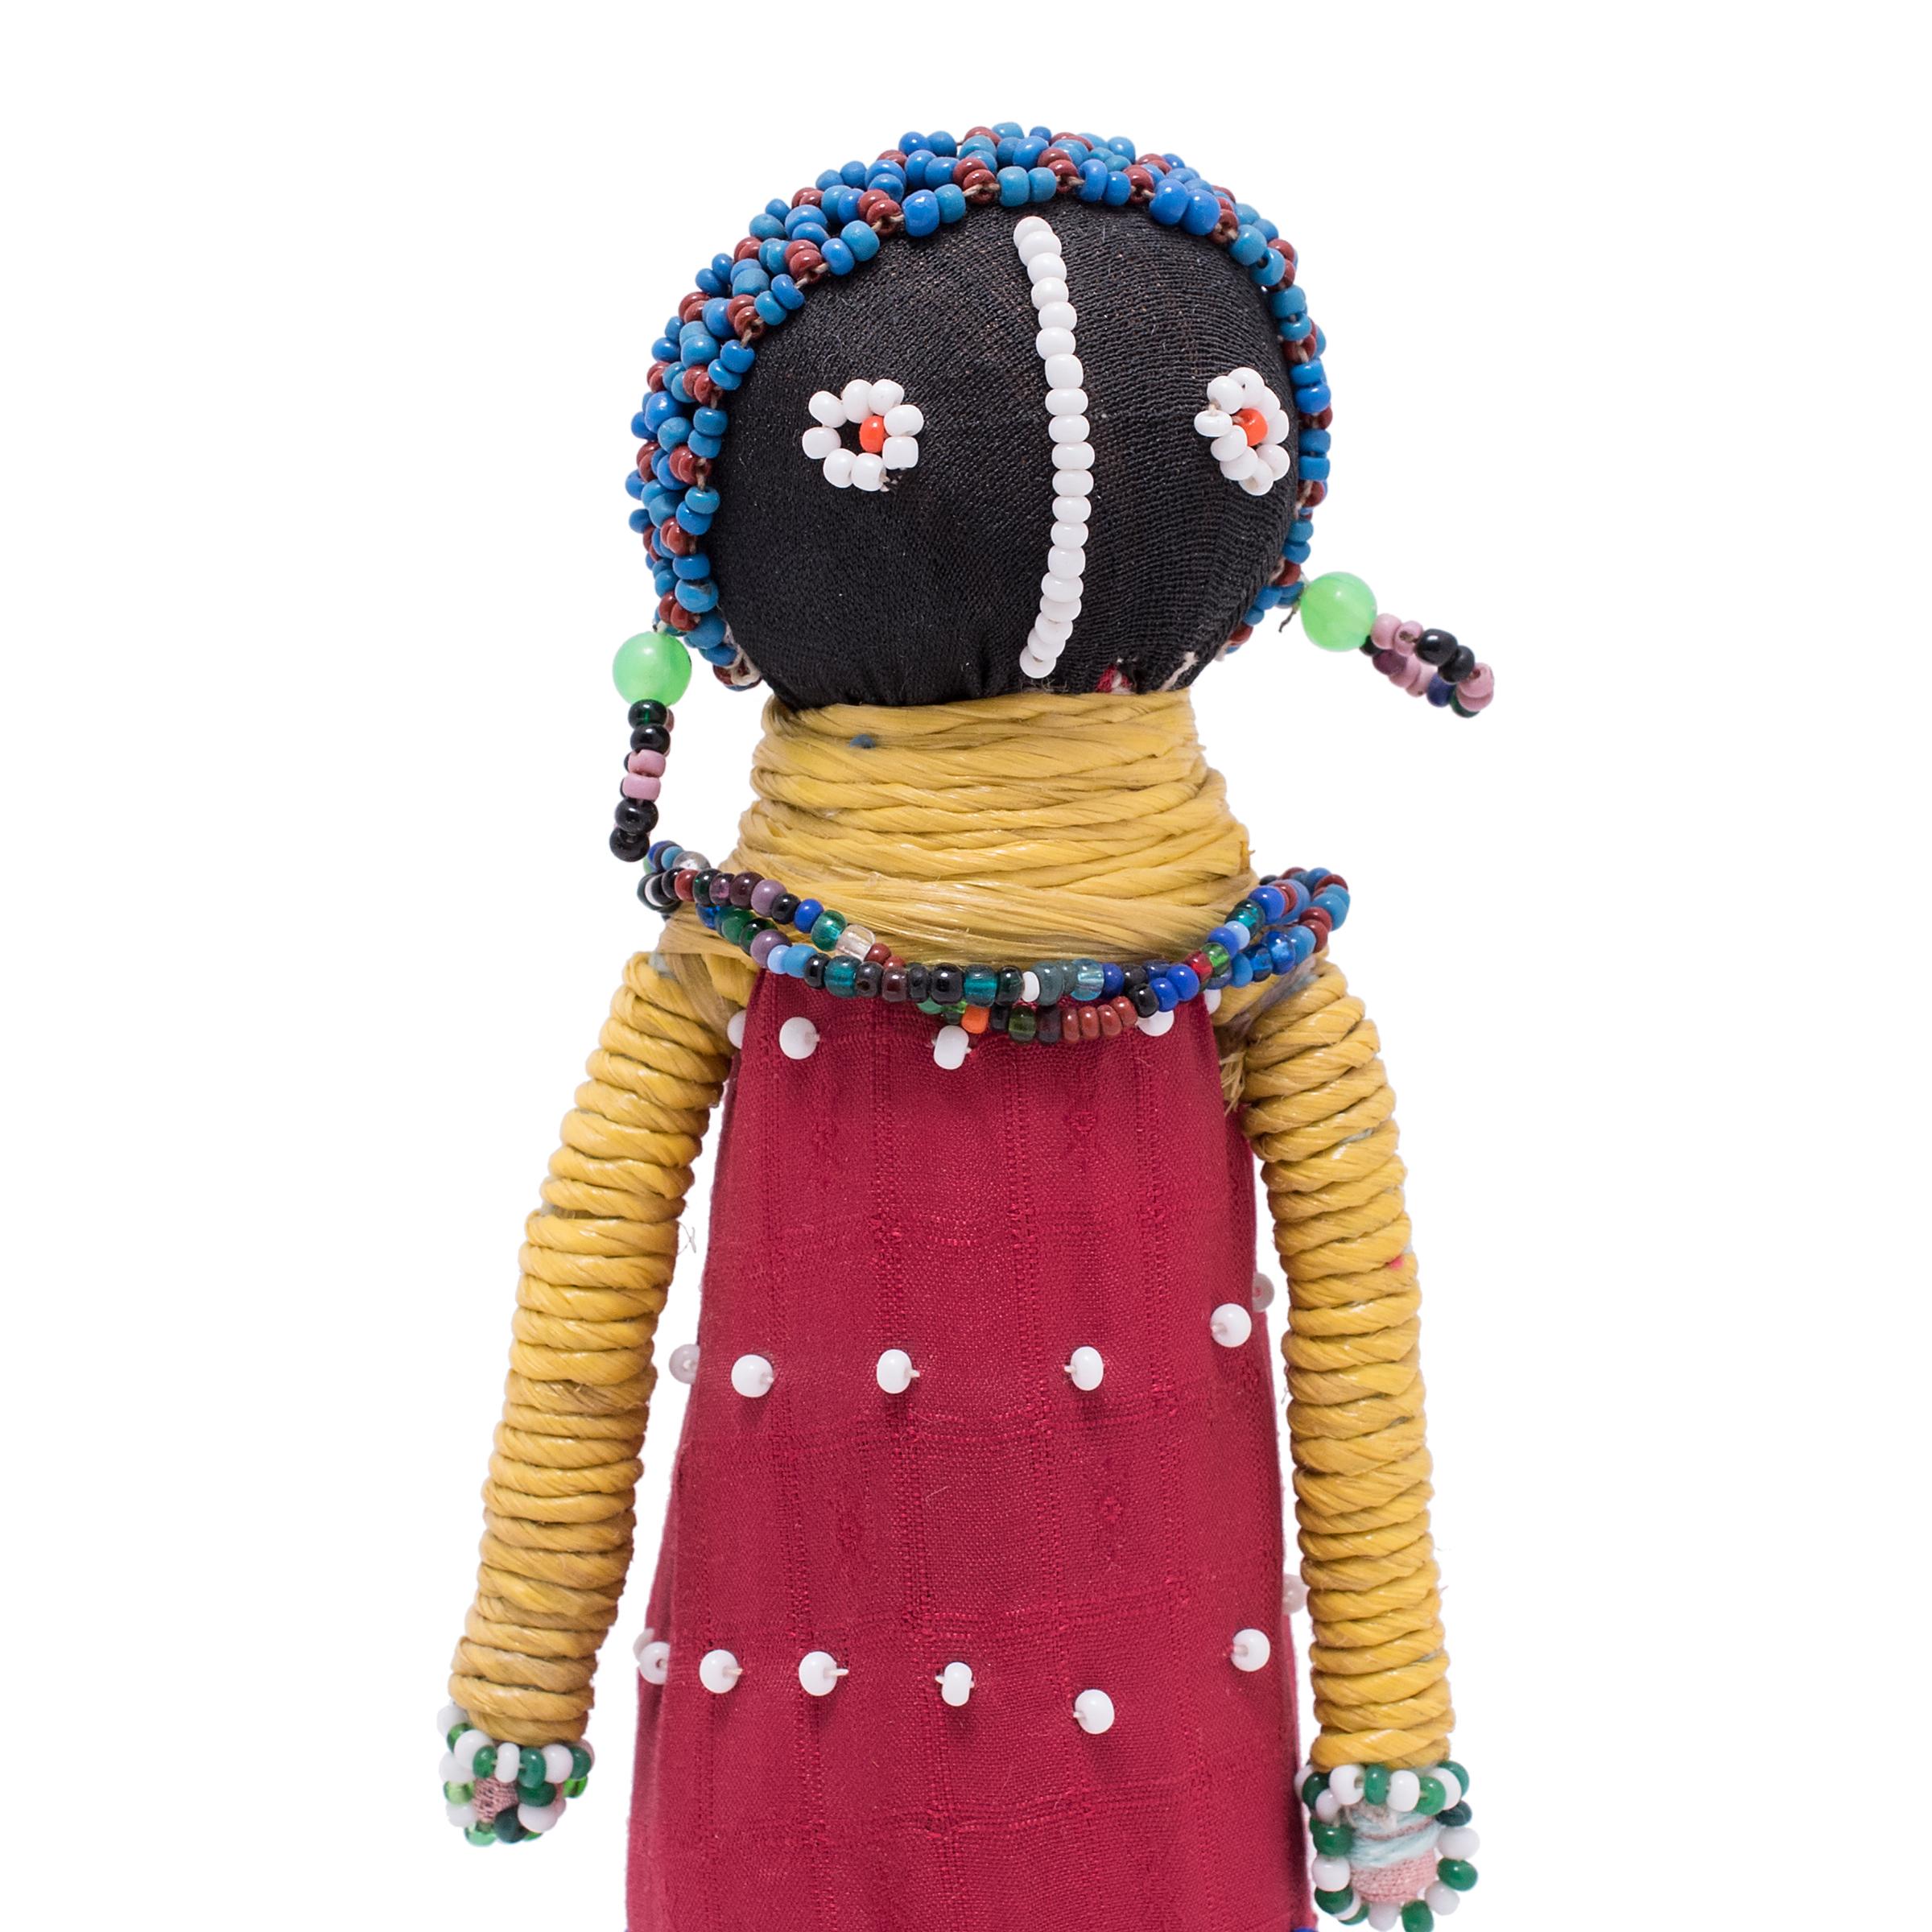 traditional african dolls